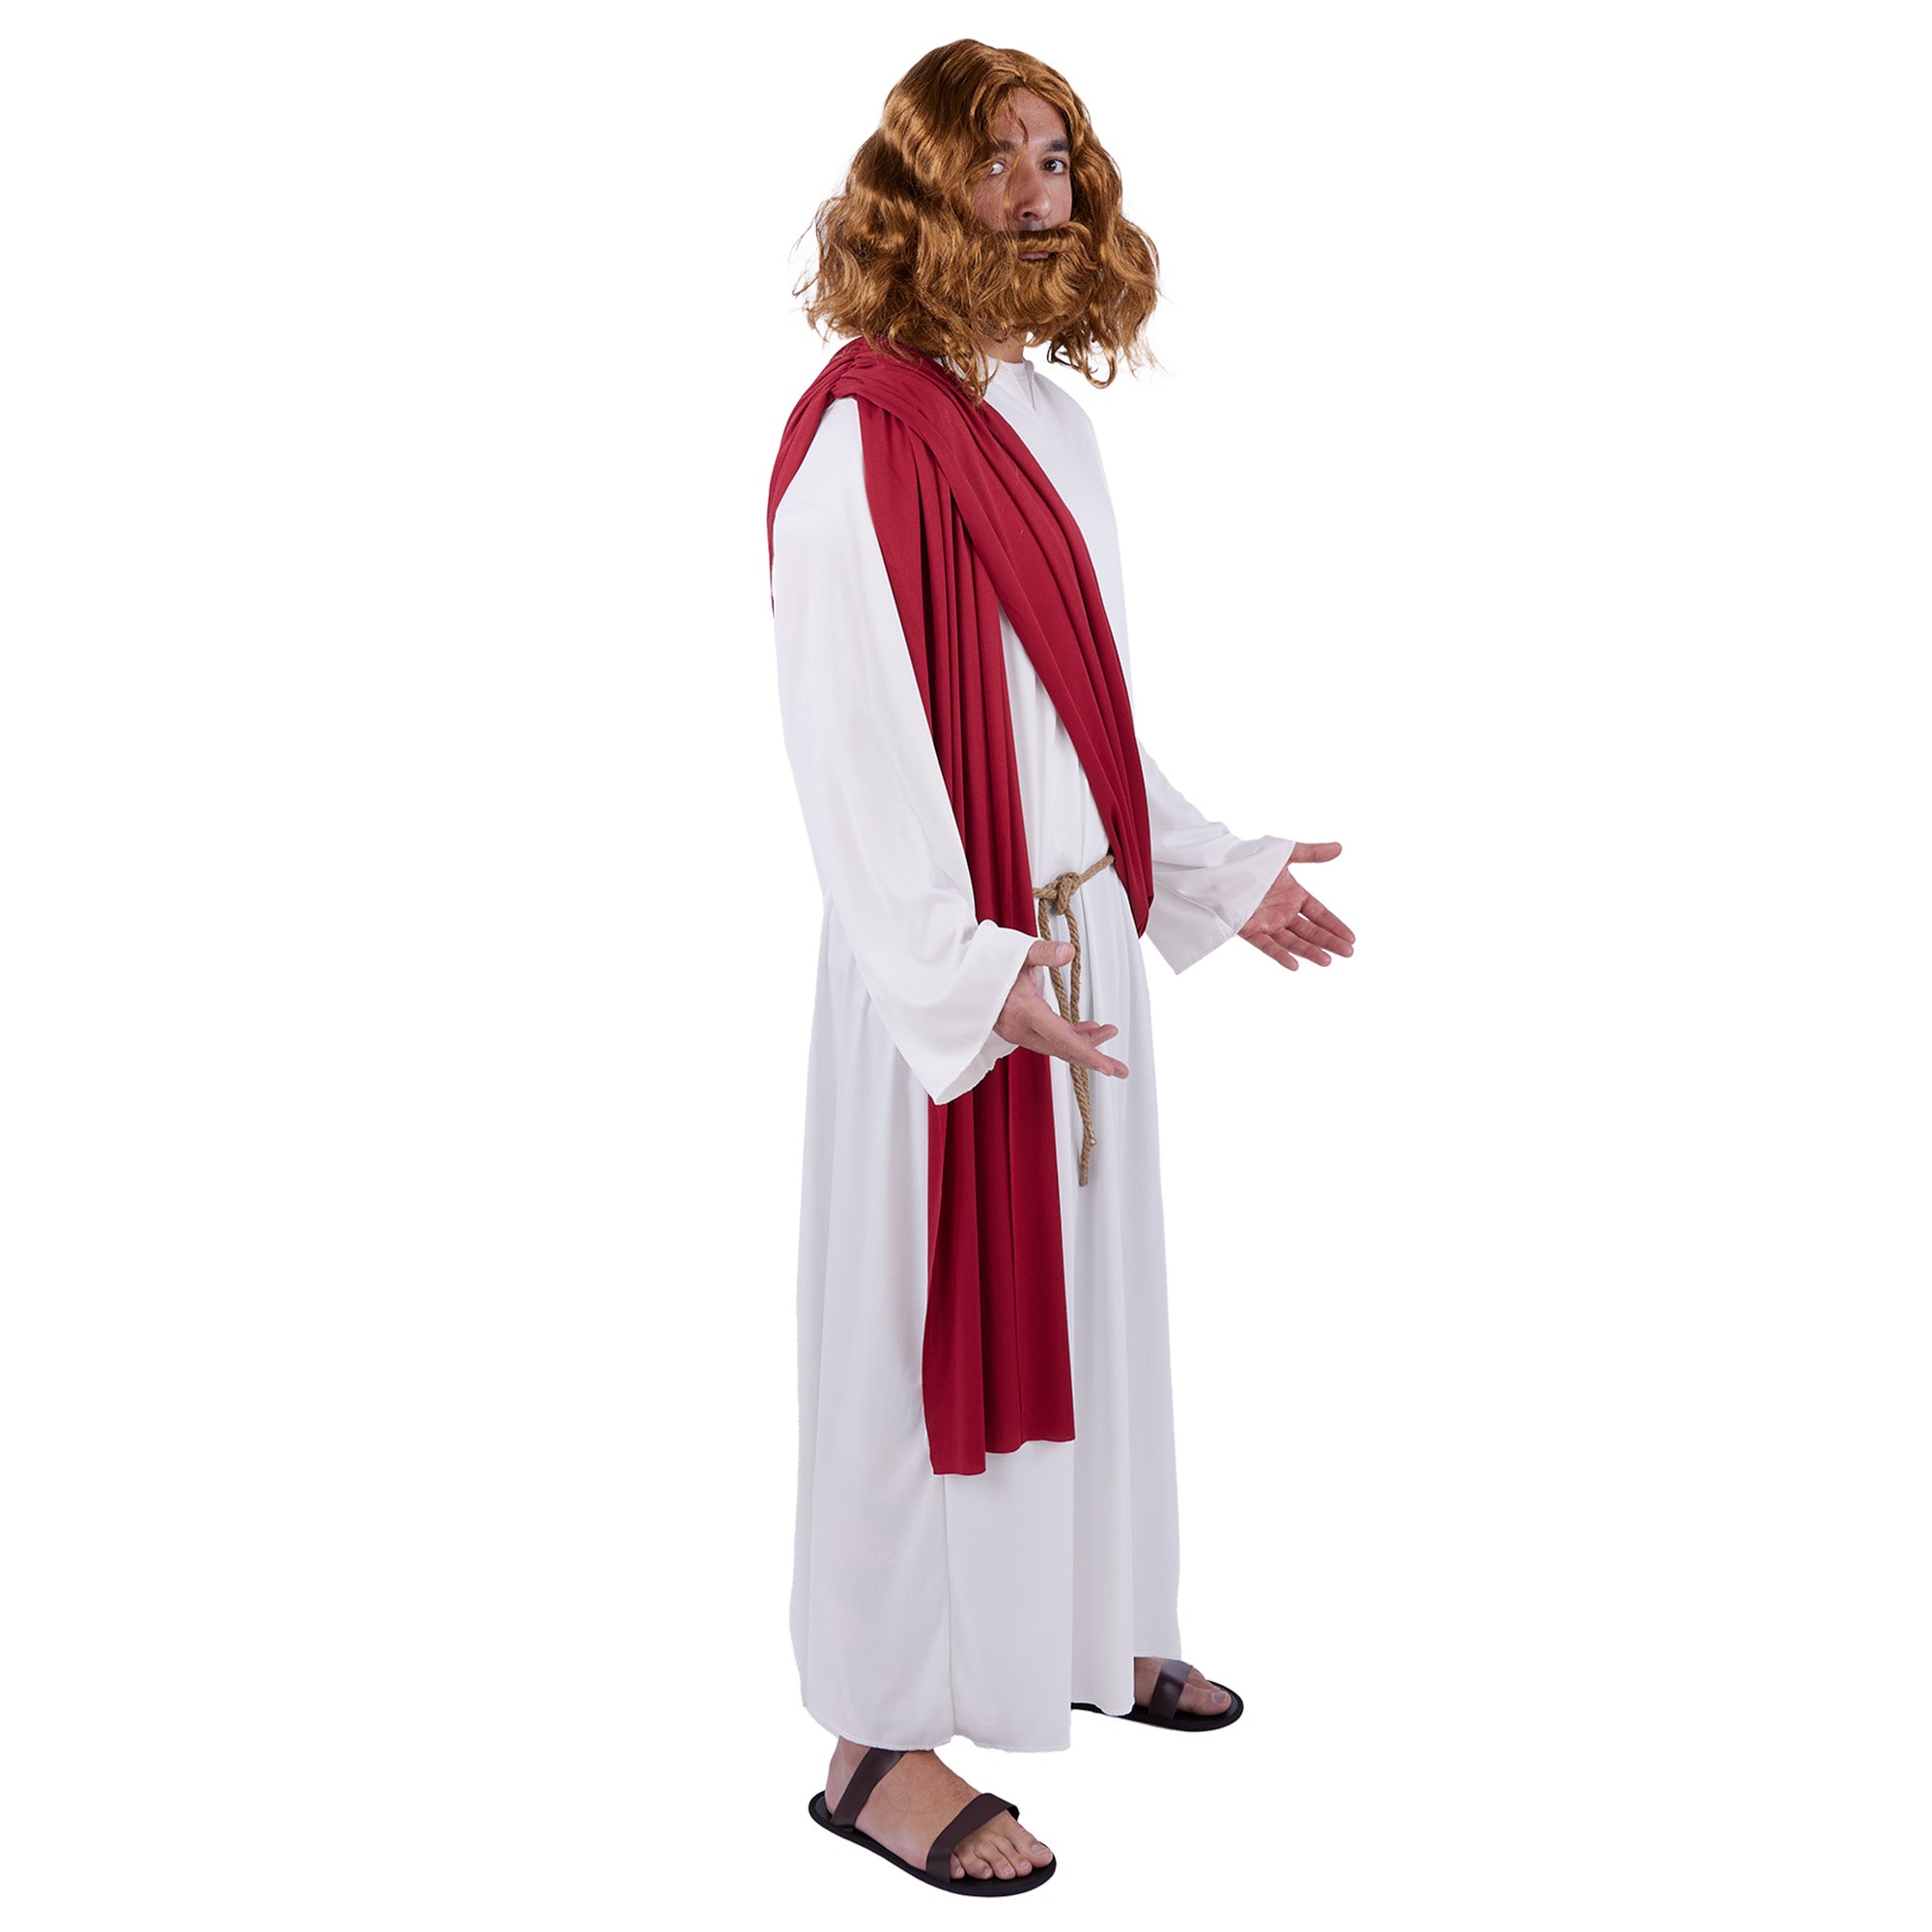 Jesus Costume for Adults, White Robe with Red Sash